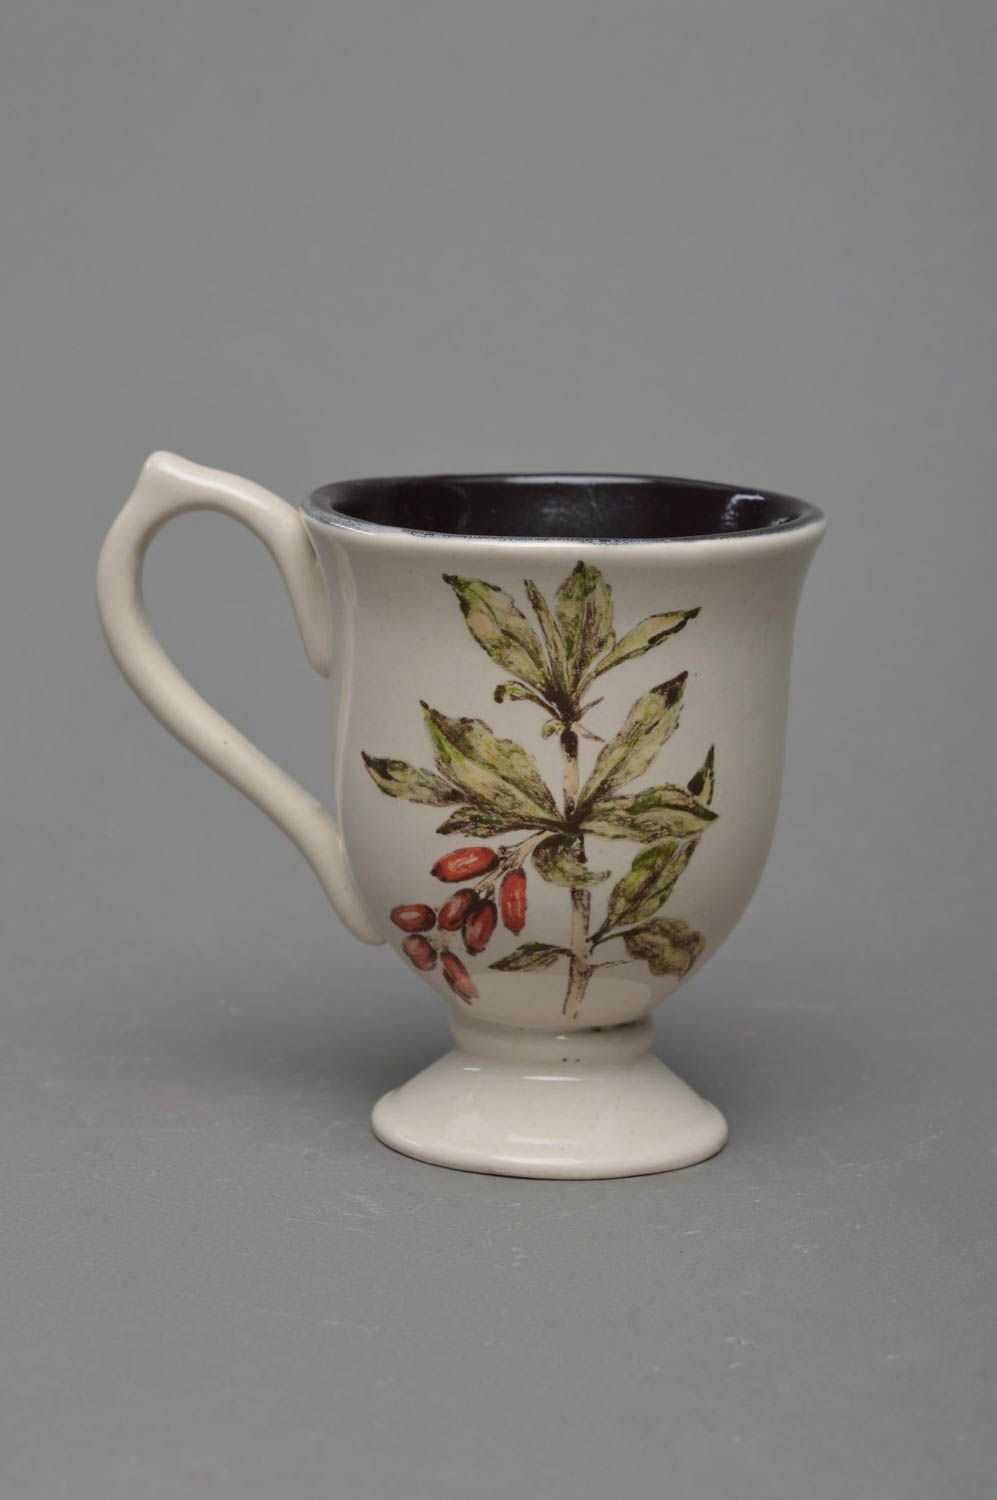 Handmade elegant porcelain glazed white and black coffee cup with barberry image photo 1